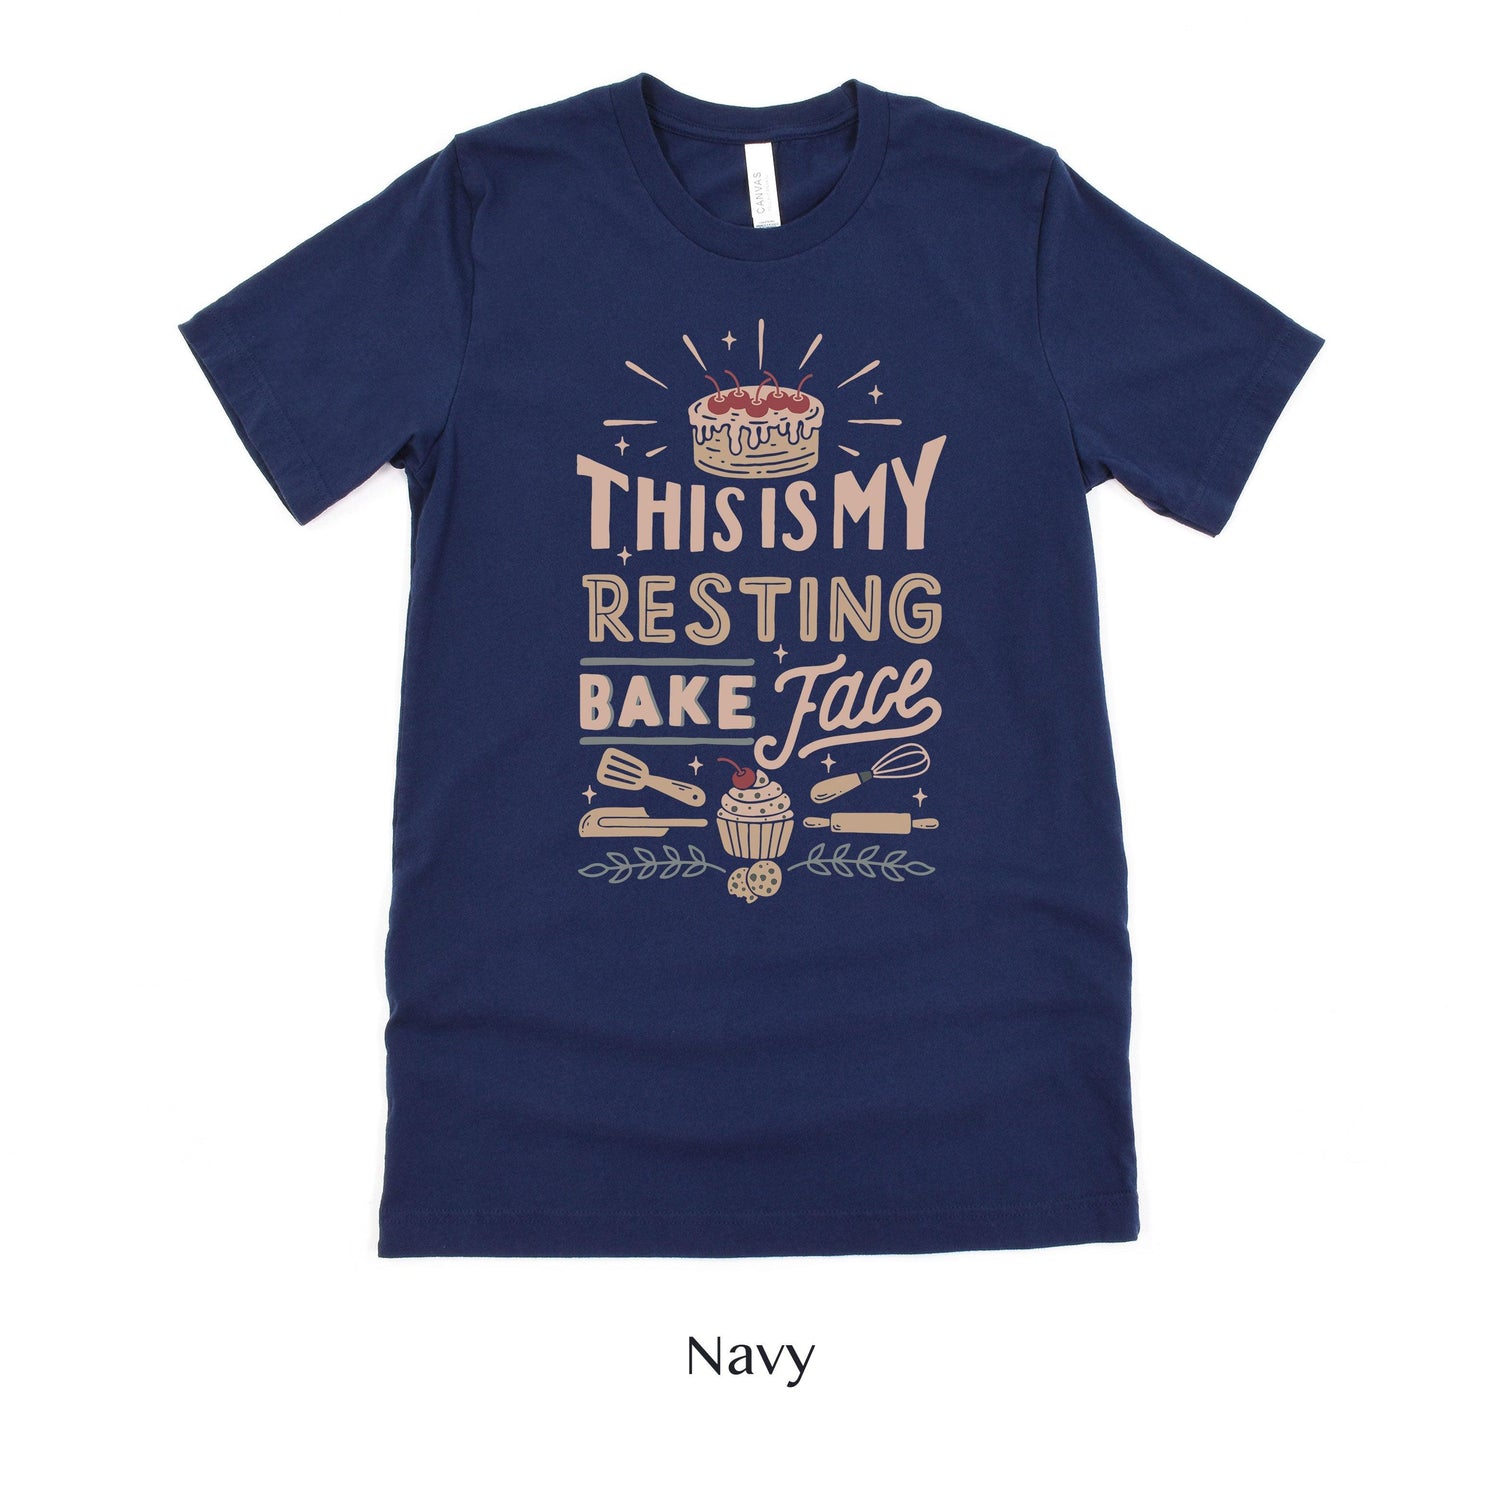 This is my resting Bake Face - Funny Cake Baker Gift Short-Sleeve Tee by Oaklynn Lane